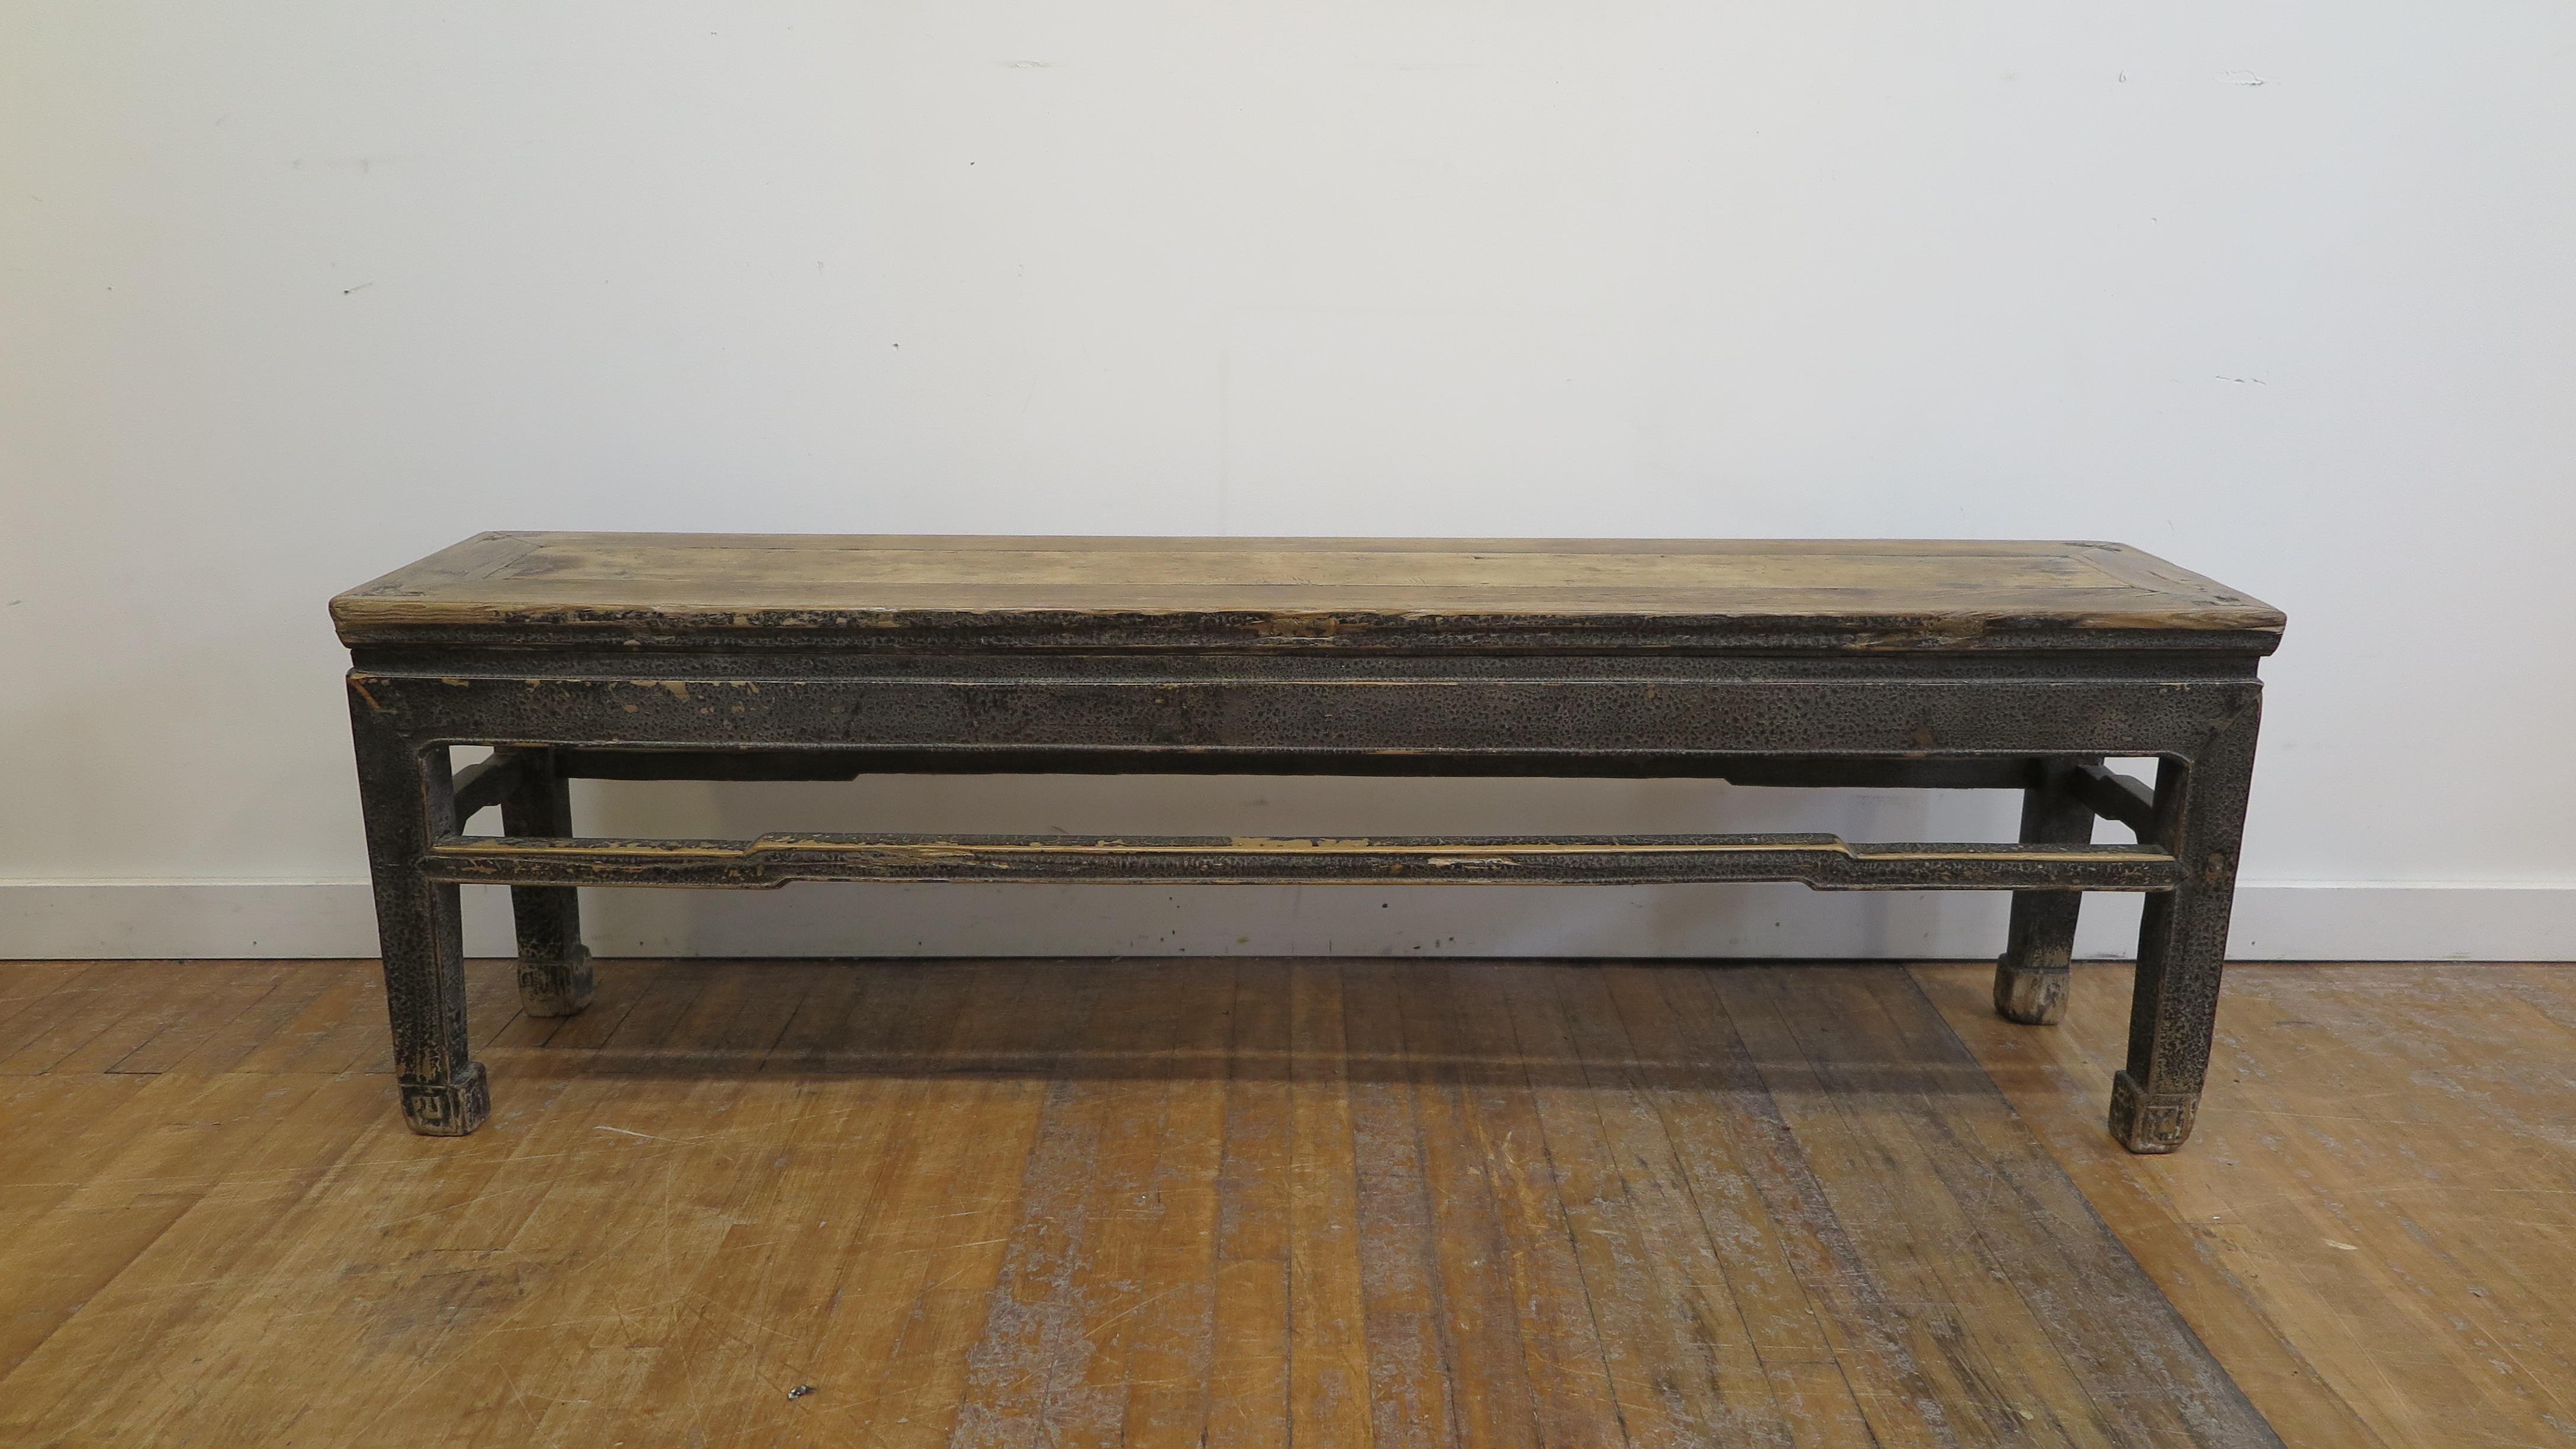 Early 19th century Chinese bench. A special black lacquered antique Elm wood bench circa 1800. A waisted (refers to specific Chinese furniture construction & joinery) raised top set on frame with hump back stretchers and struts. A most sensational